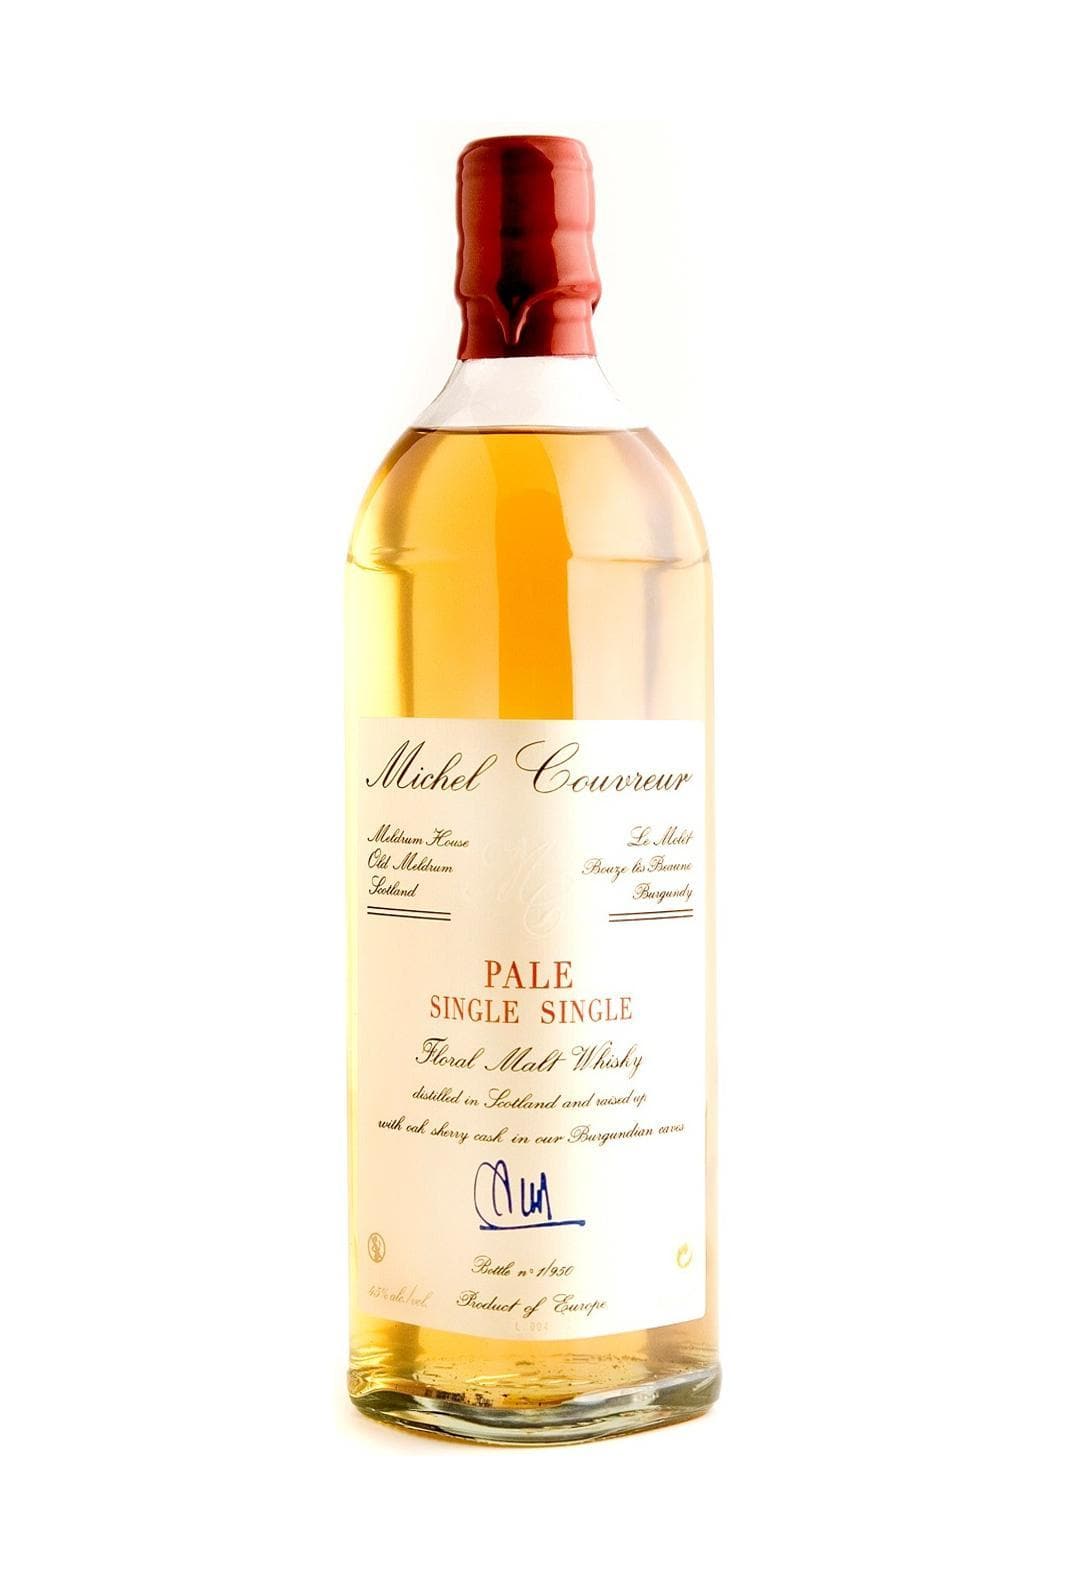 Michel Couvreur Whisky Pale Single Single 45% 700ml | Whiskey | Shop online at Spirits of France